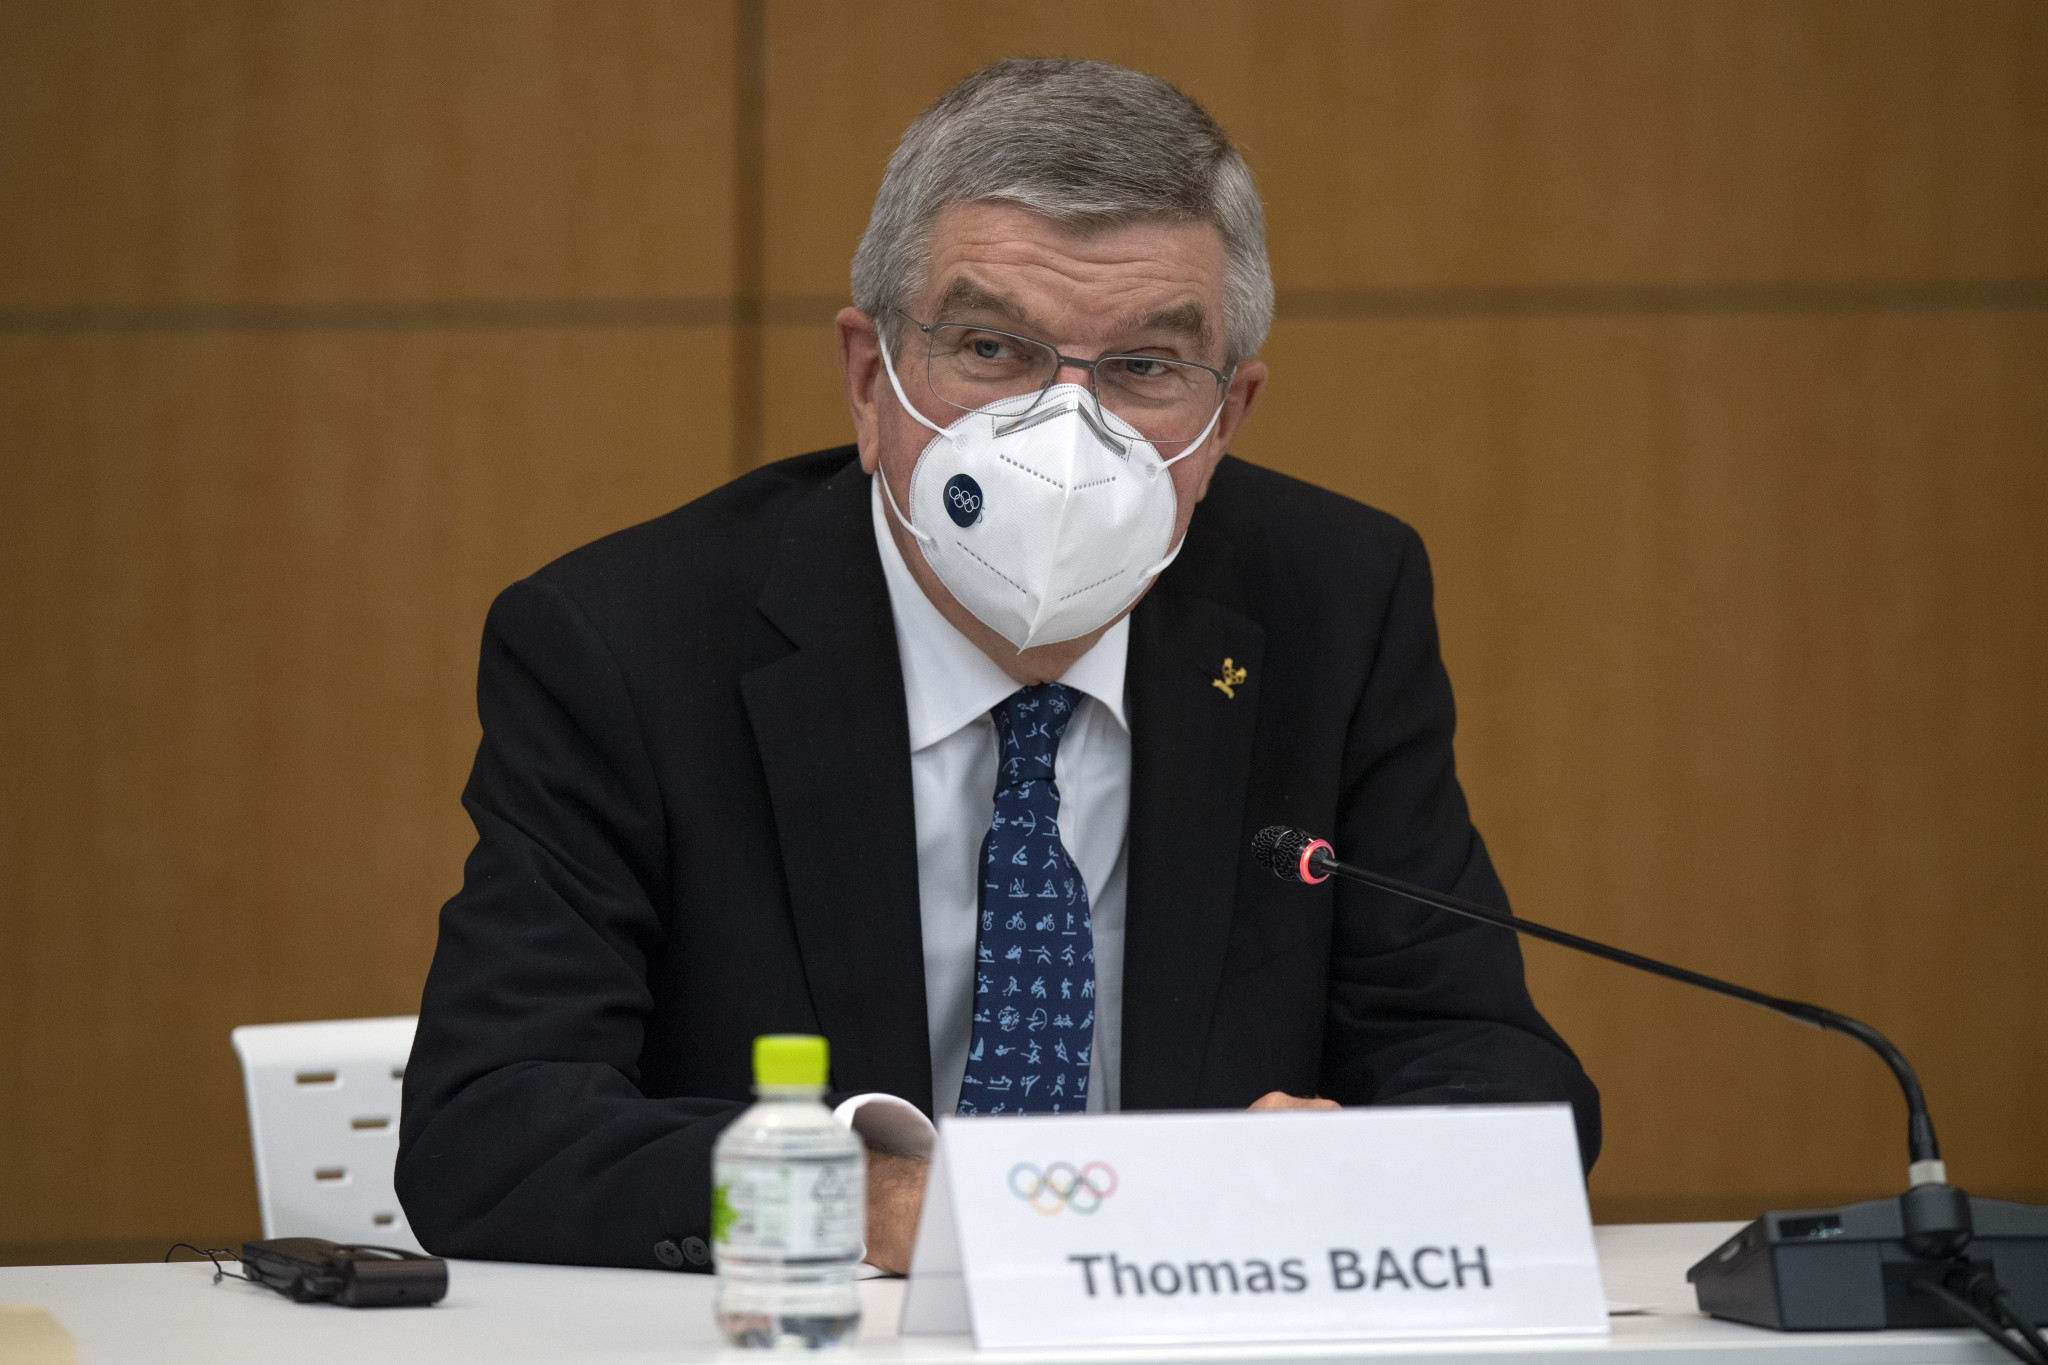 IOC President Thomas Bach said the organisation was grateful for the G7 leaders statement - which he described as a 